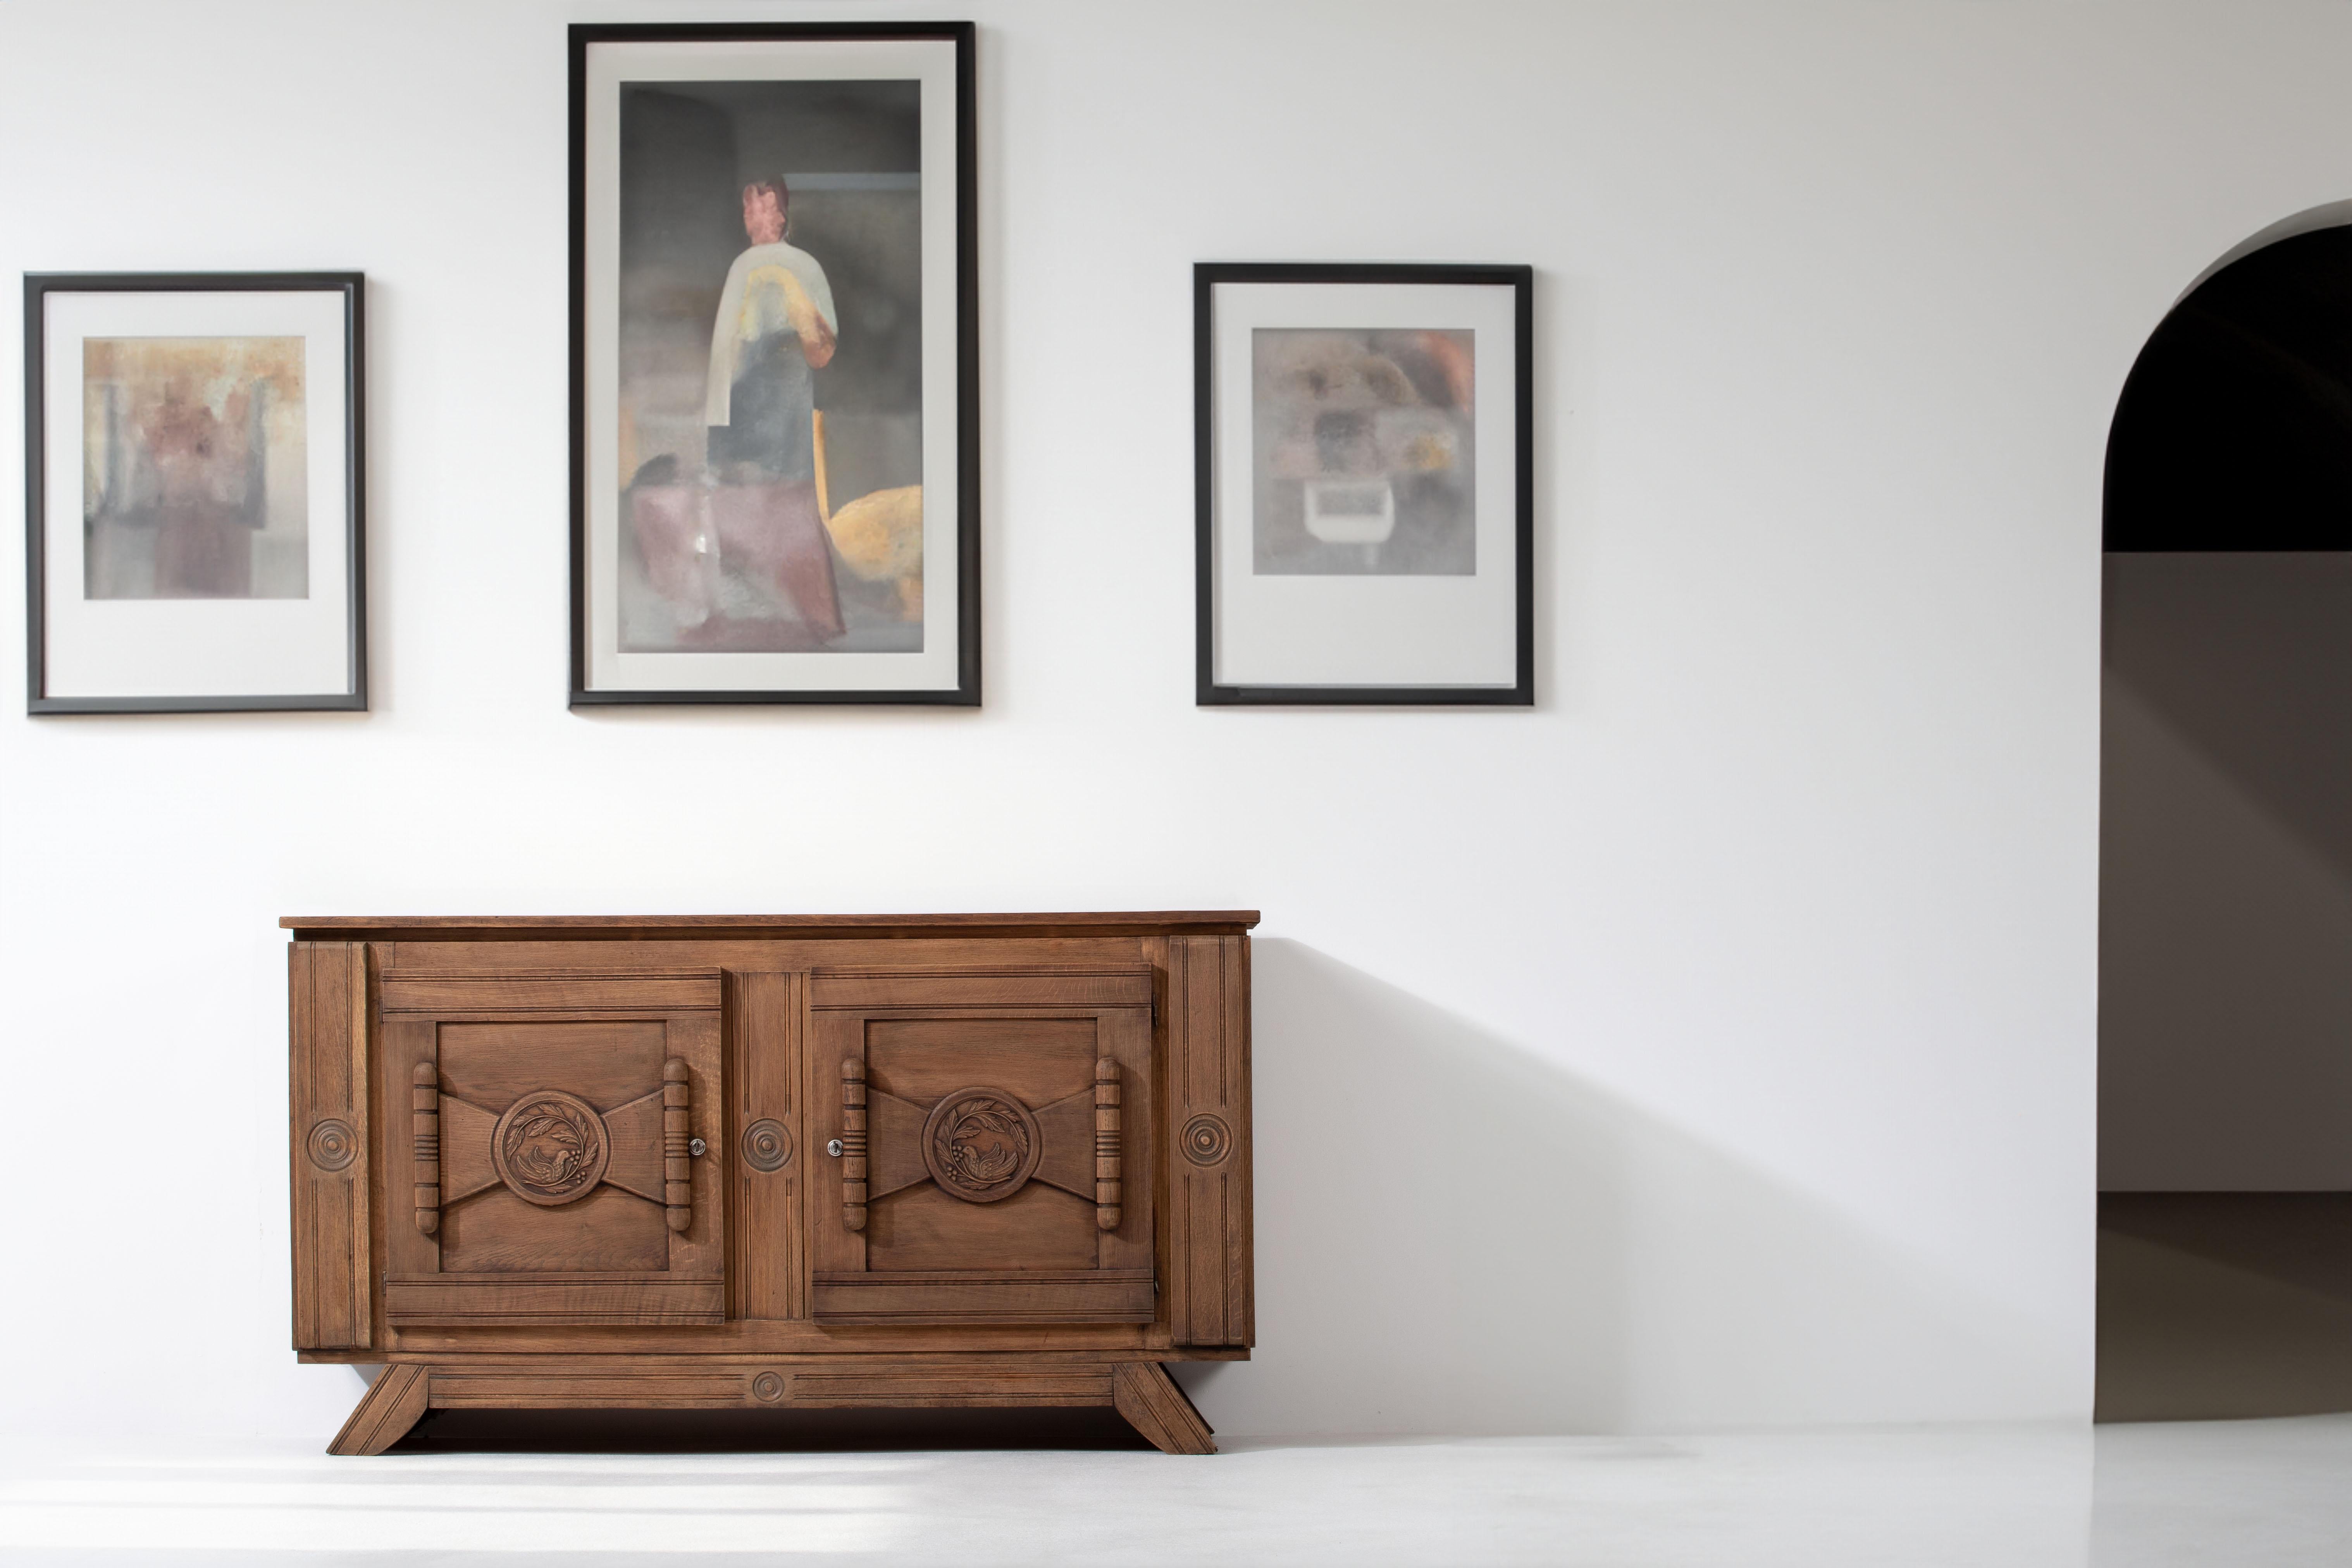 Unearthed in Normandy, this Breton-style sideboard in solid oak boasts a stunning brutalist look that brings a touch of raw and powerful design to any space. With two spacious storage compartments, this remarkable piece offers both functionality and